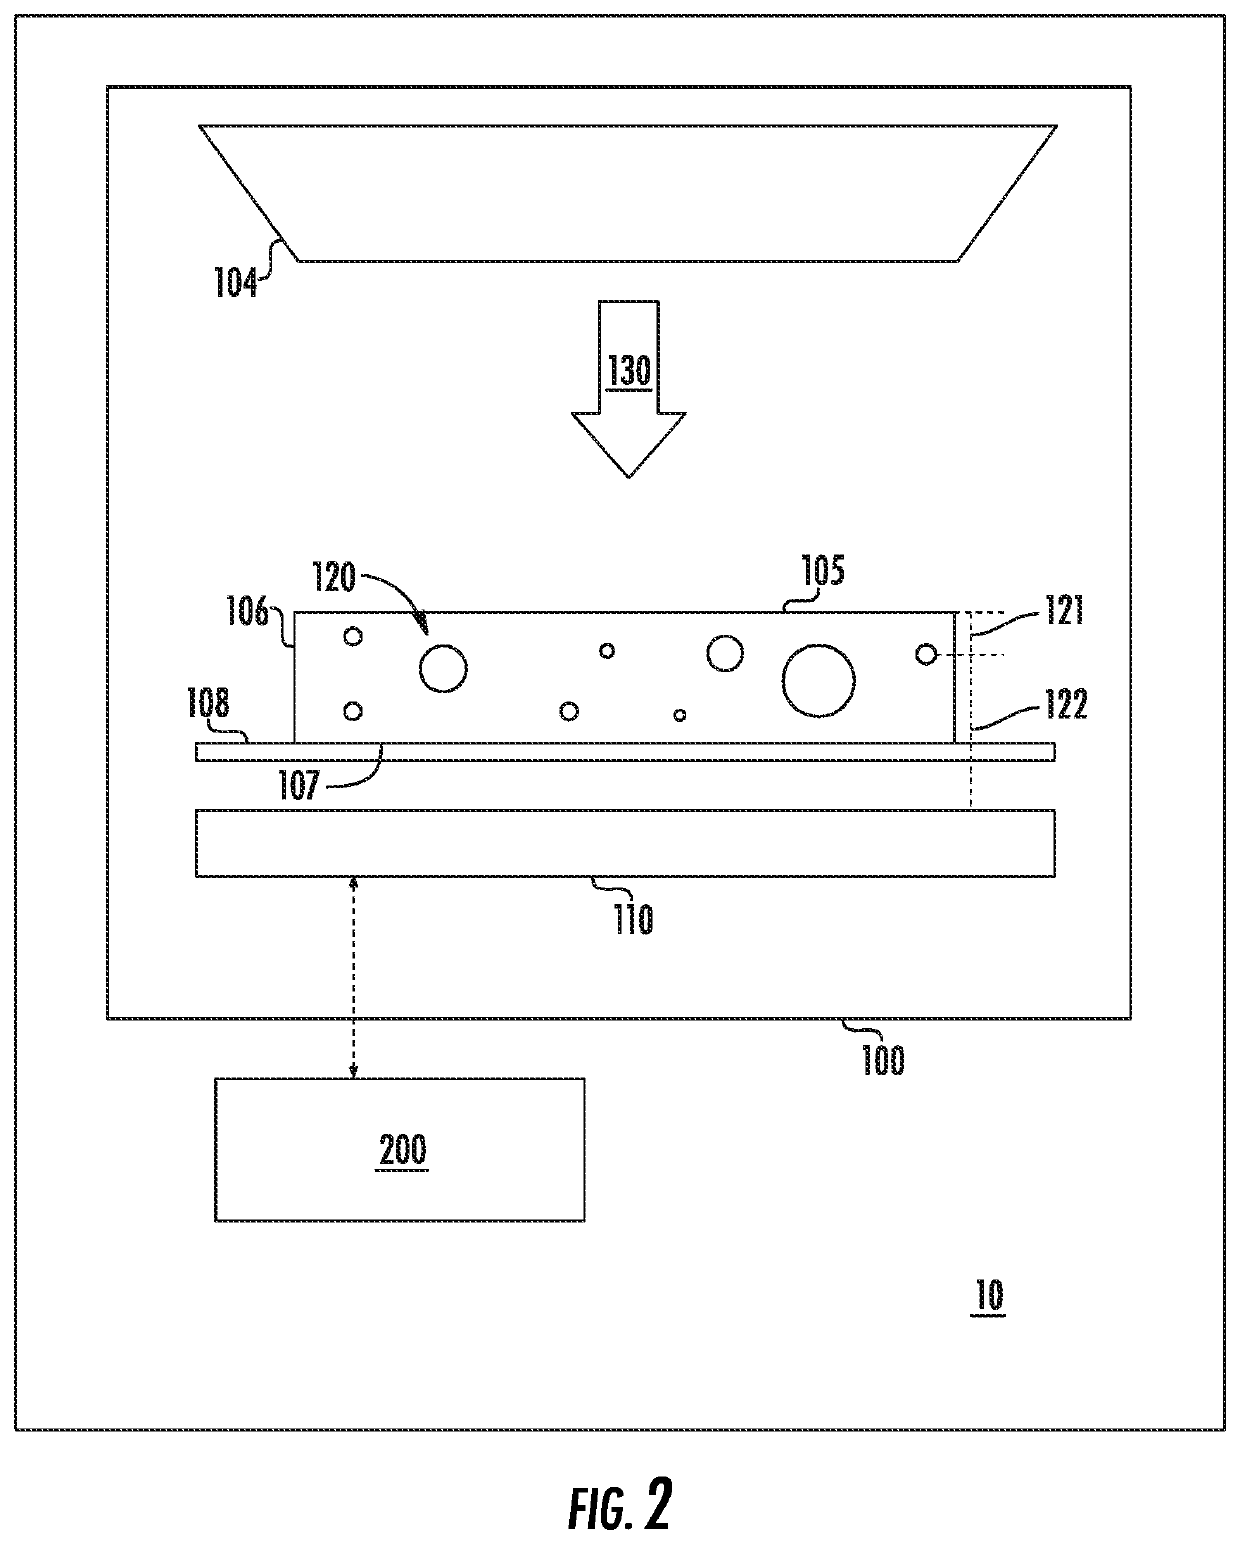 Fluid composition sensor device and method of using the same